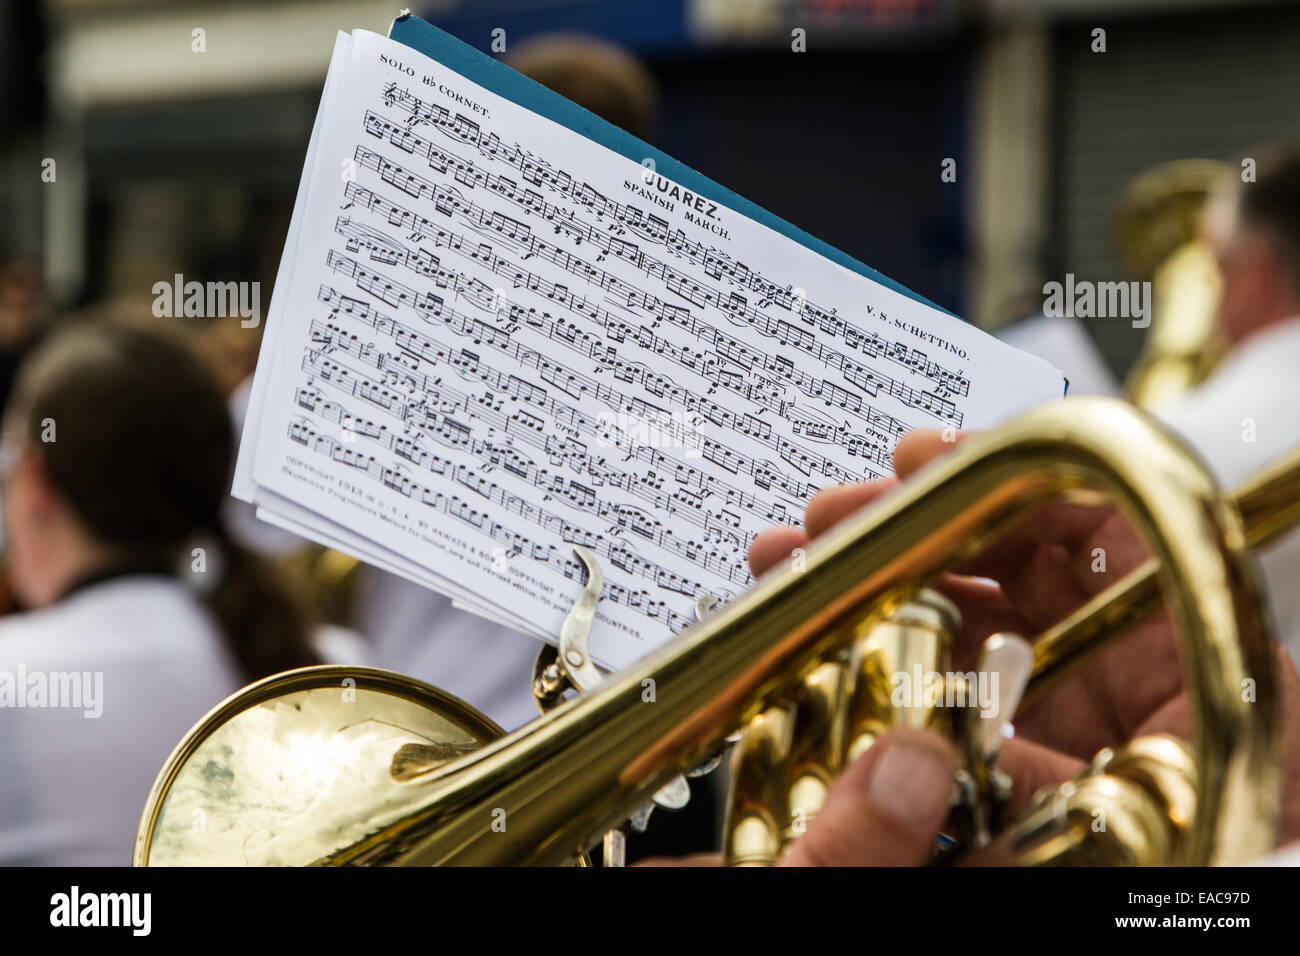 Man playing a trumpet brass instrument to Juarez music sheet marching at the Carnaval Del Pueblo London England Stock Photo